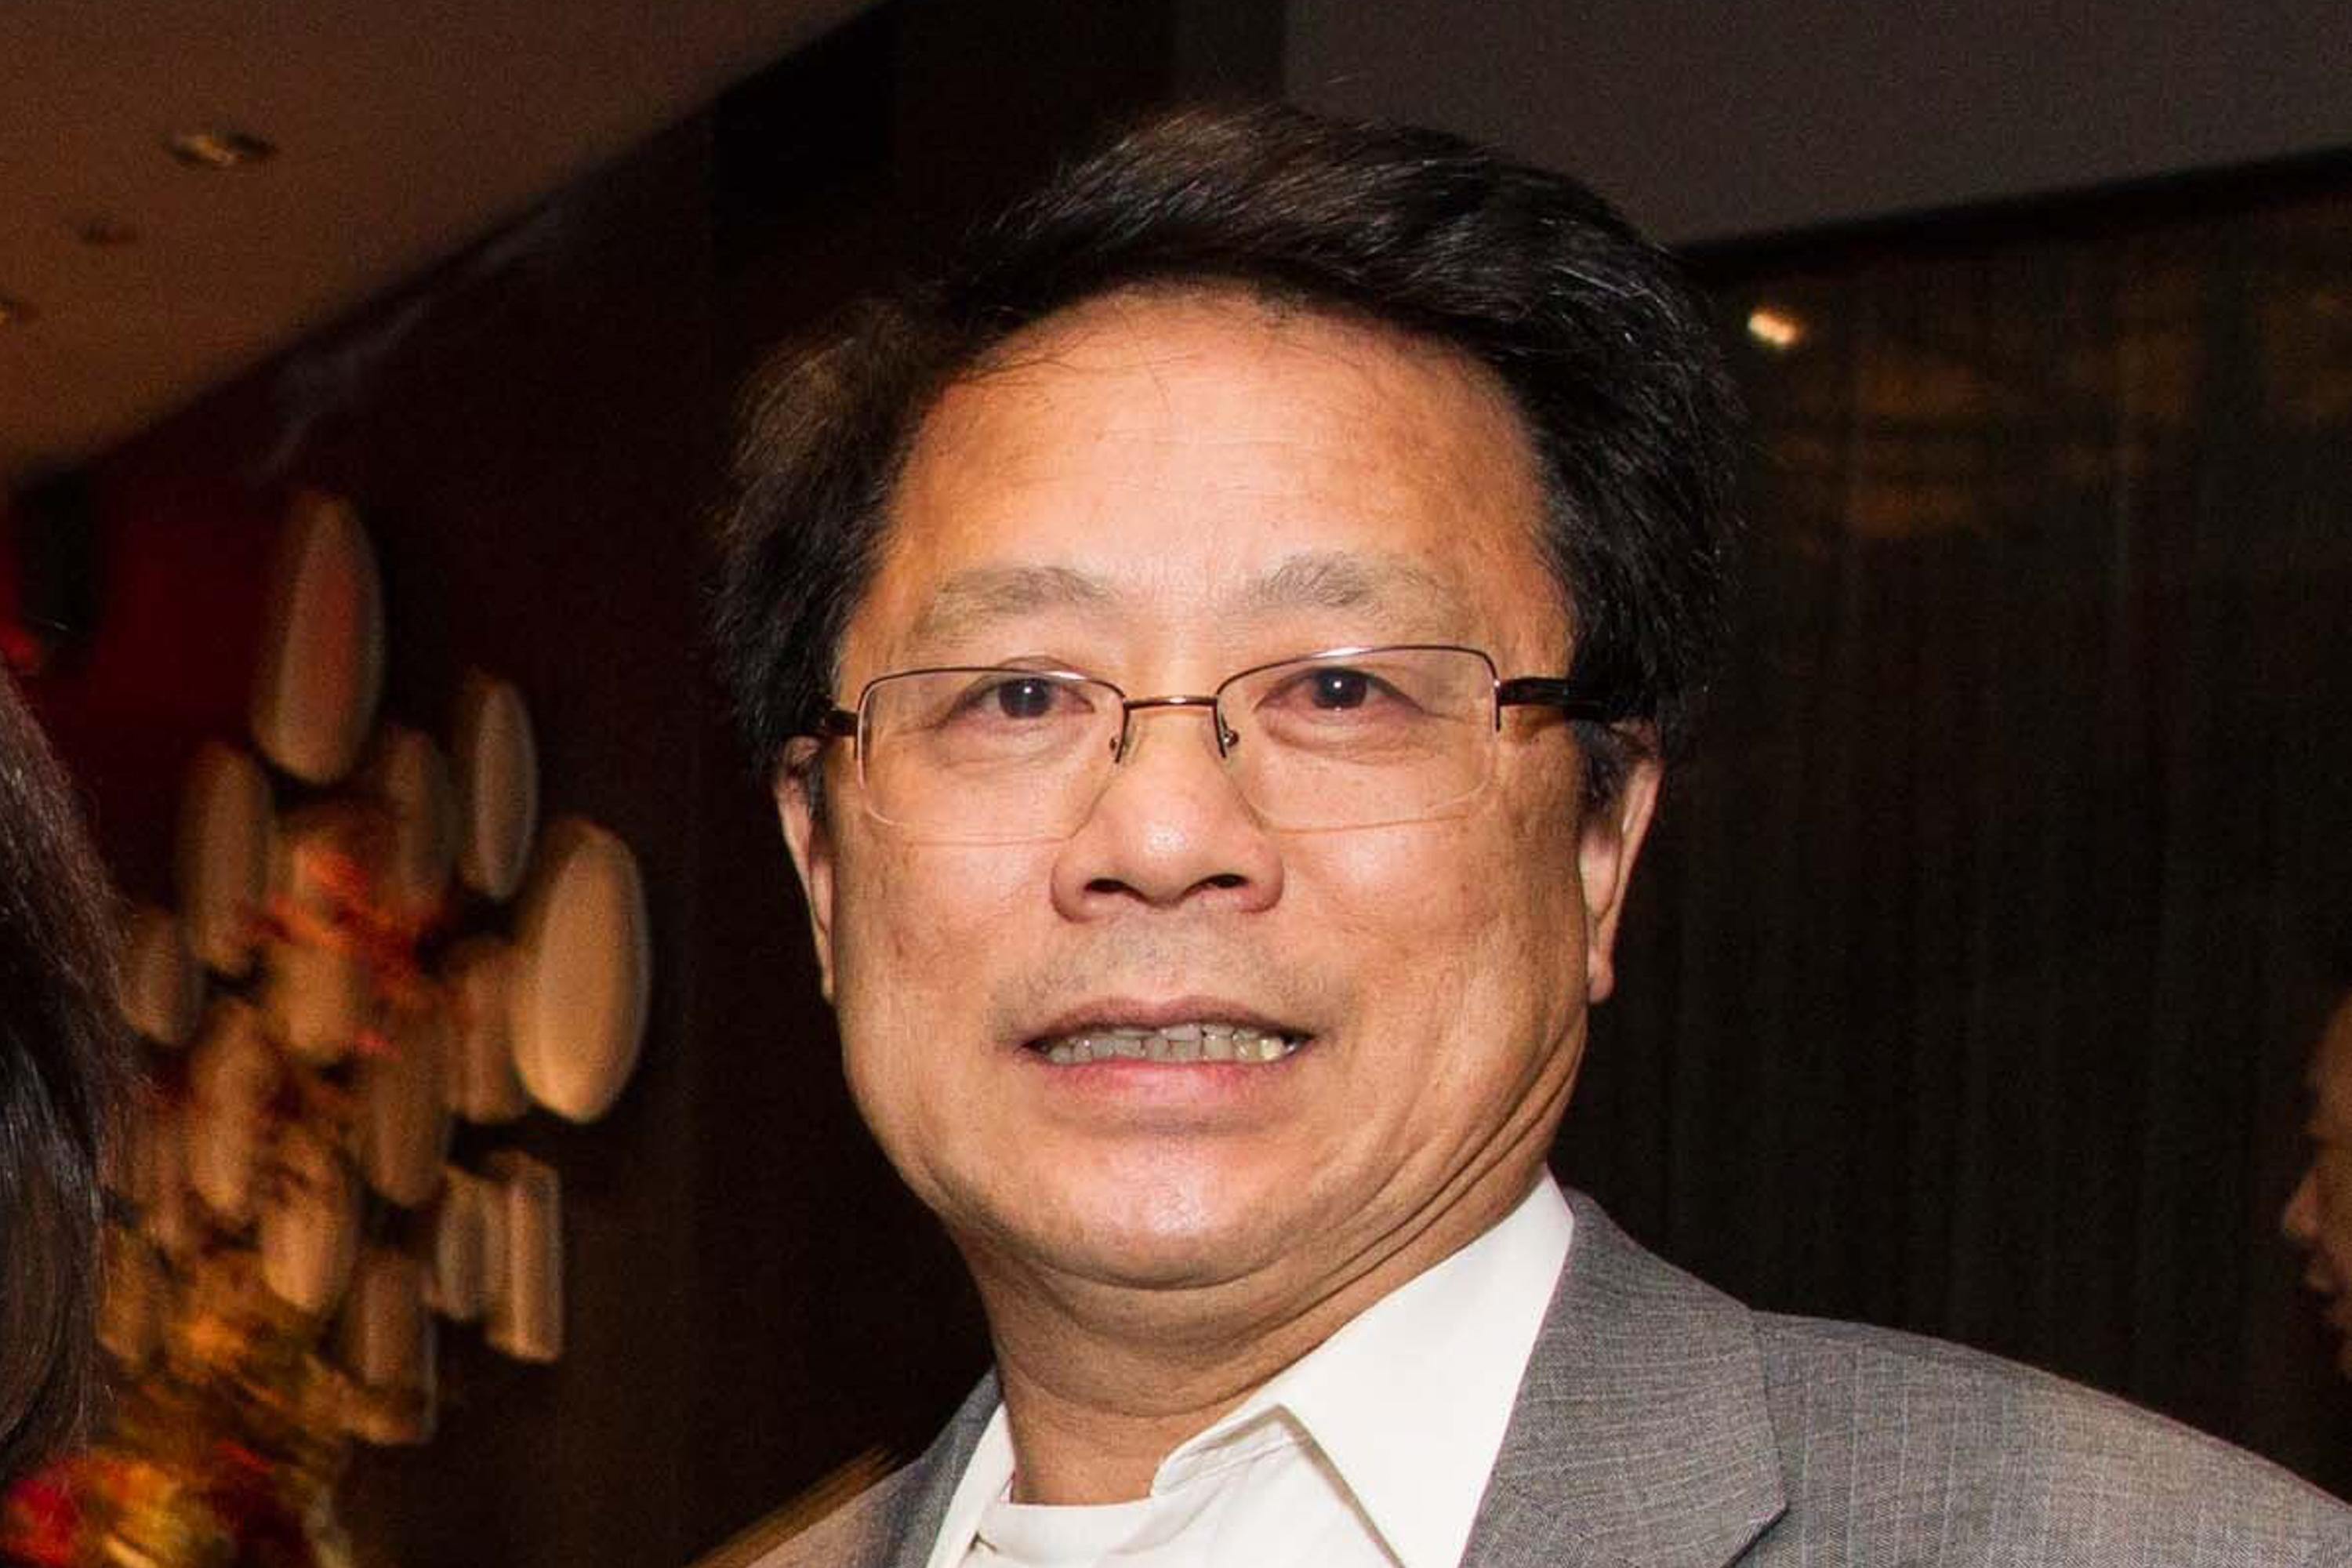 A smiling middle-aged man with glasses, wearing a suit.